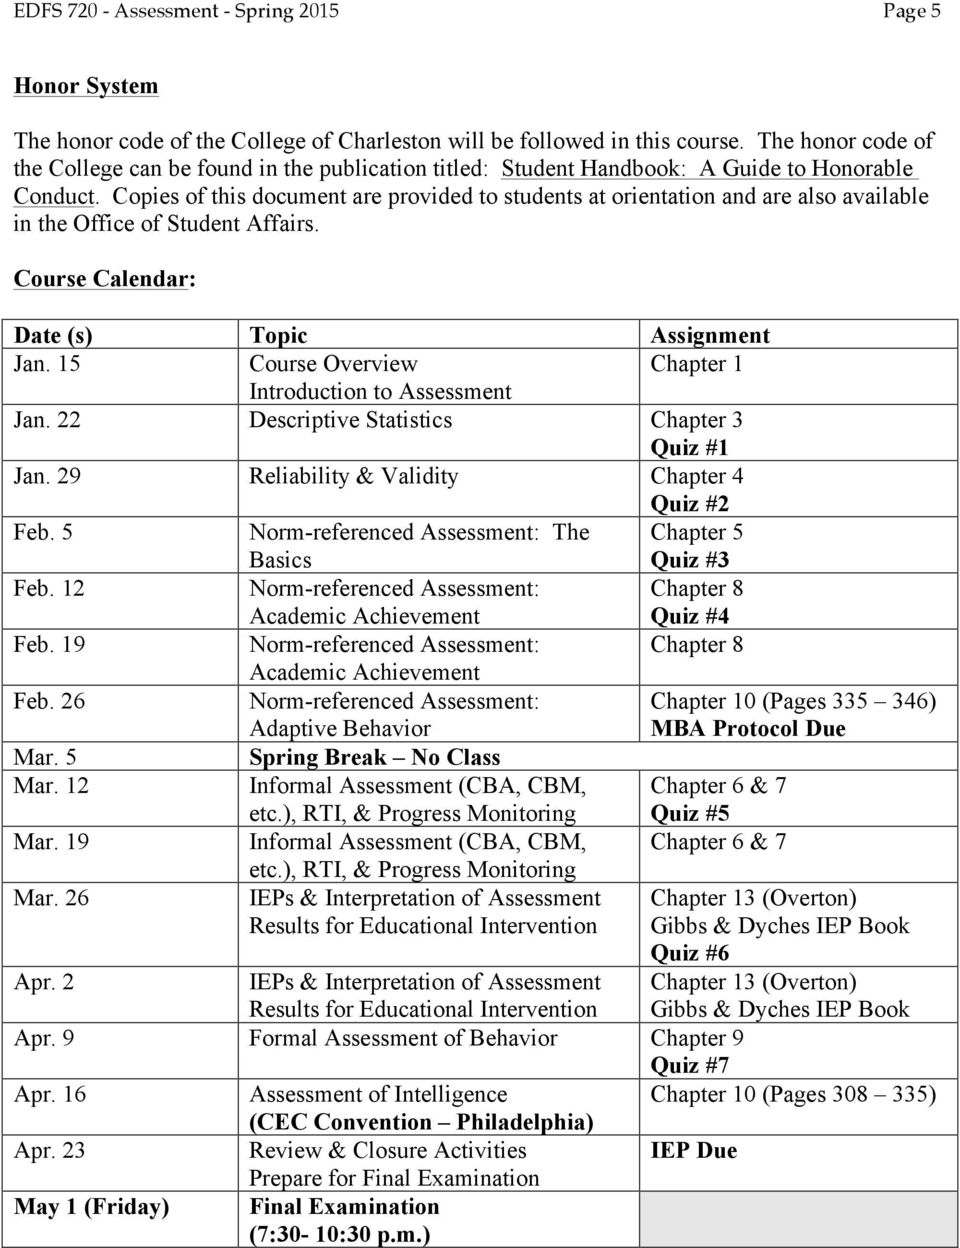 Copies of this document are provided to students at orientation and are also available in the Office of Student Affairs. Course Calendar: Date (s) Topic Assignment Jan.